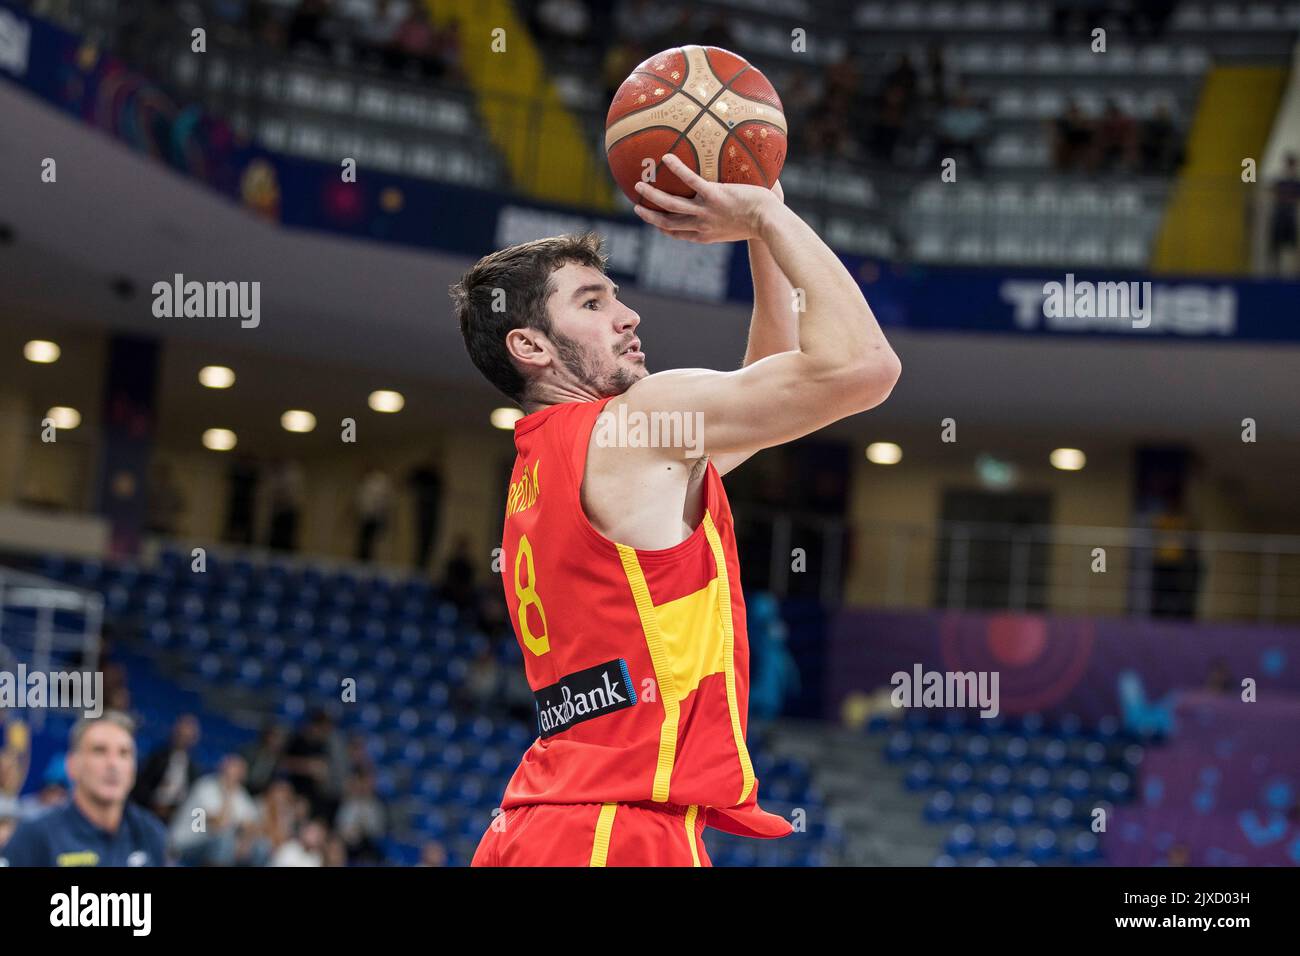 Tbilisi, Georgia, 6th September 2022. Dario Brizuela of Spain shoots for three points during the FIBA EuroBasket 2022 group A match between Montenegro and Spain at Tbilisi Arena in Tbilisi, Georgia. September 6, 2022. Credit: Nikola Krstic/Alamy Stock Photo